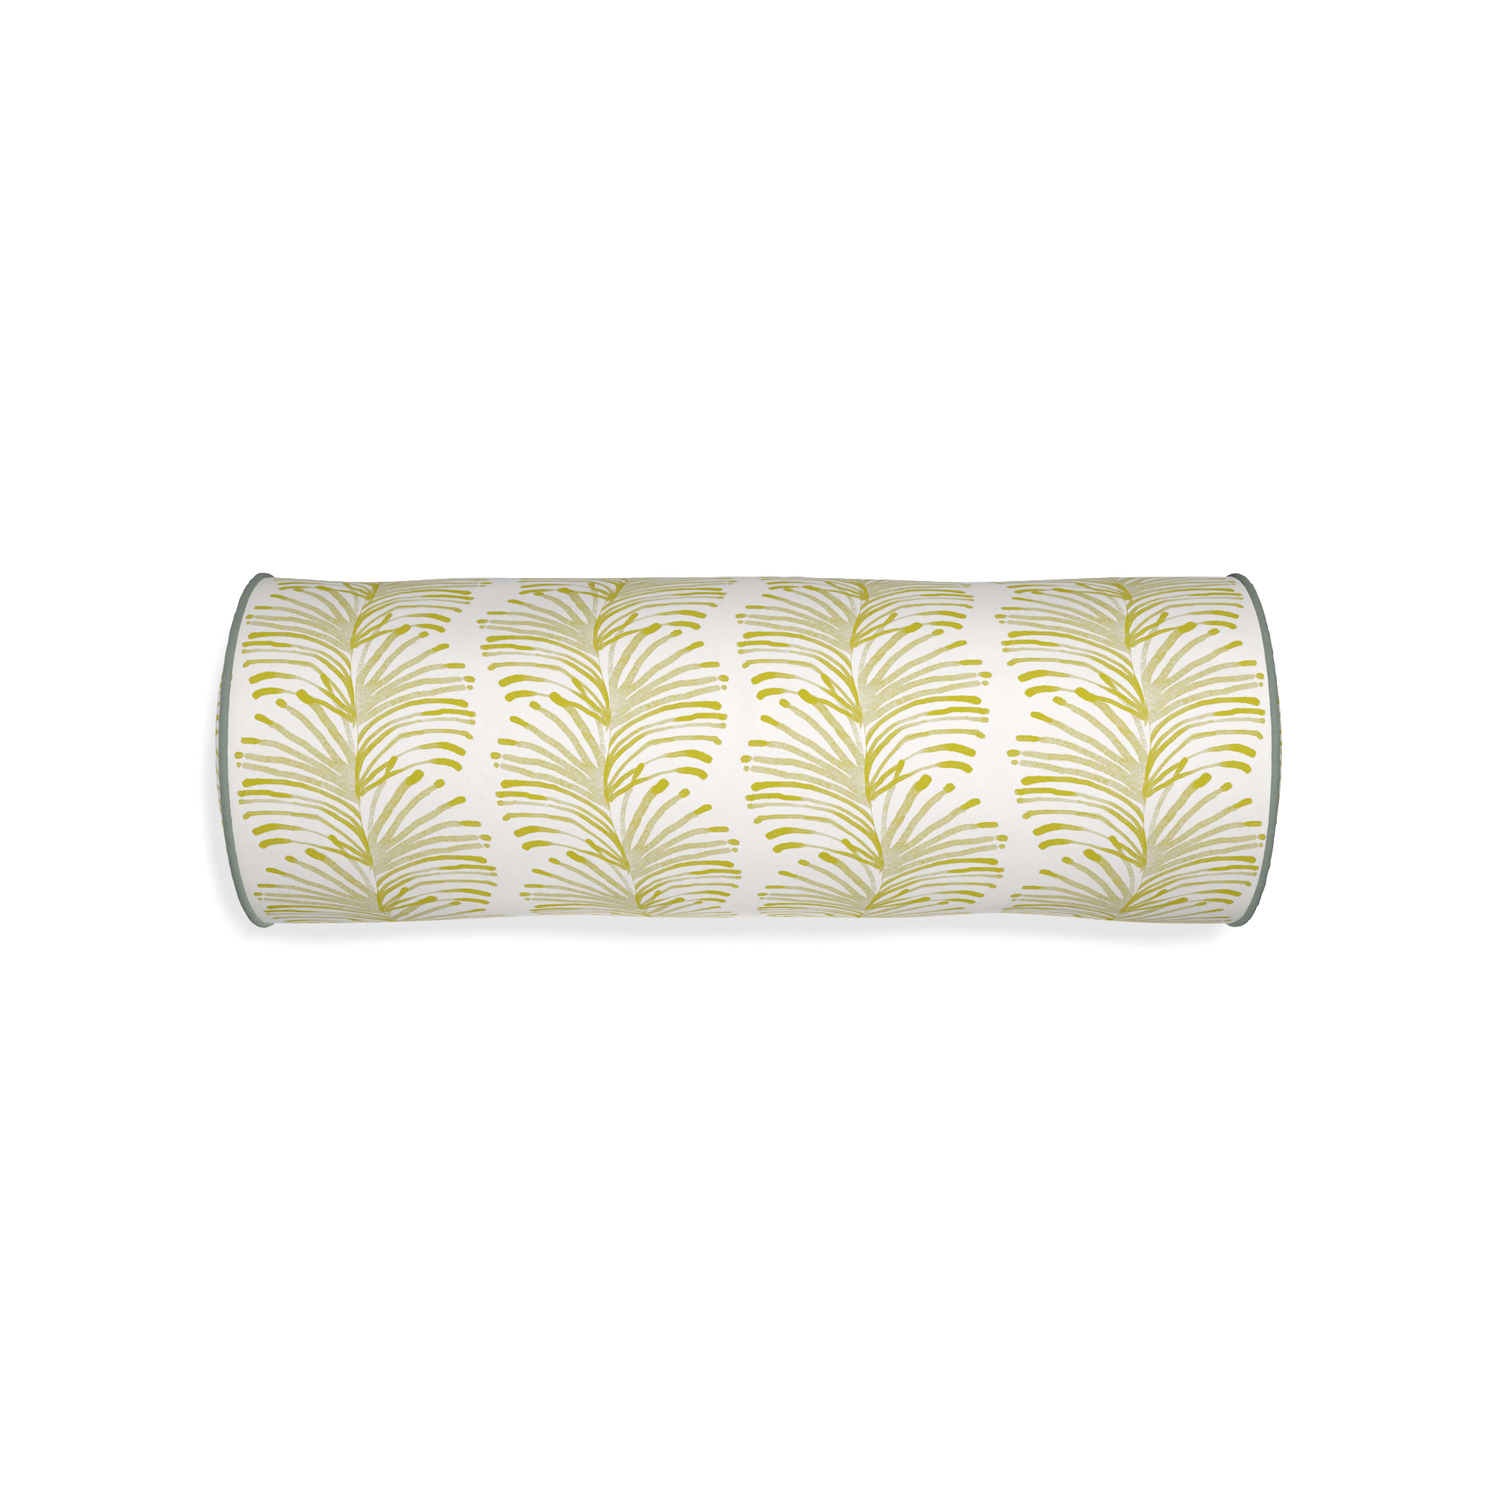 Bolster emma chartreuse custom yellow stripe chartreusepillow with sage piping on white background